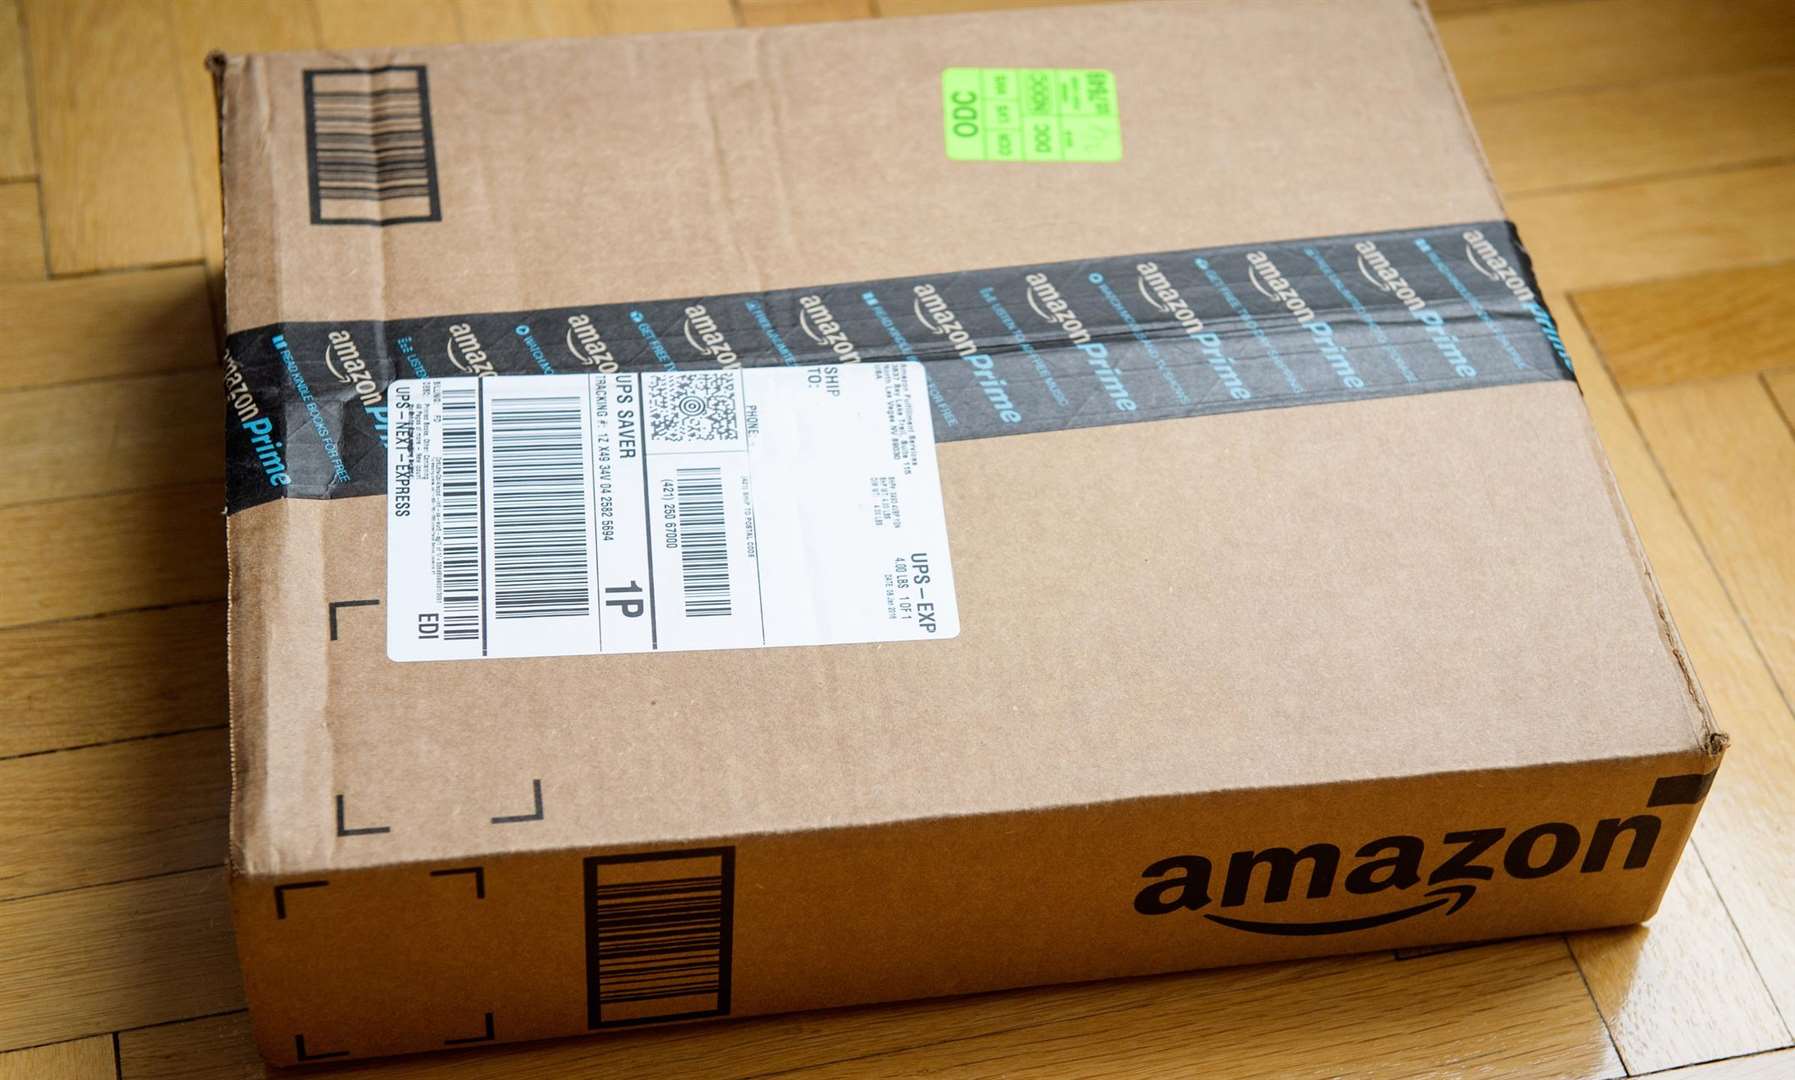 Bargain hunters have turned their sights on Amazon's Prime Day summer sale with millions of cut-price deals up for grabs